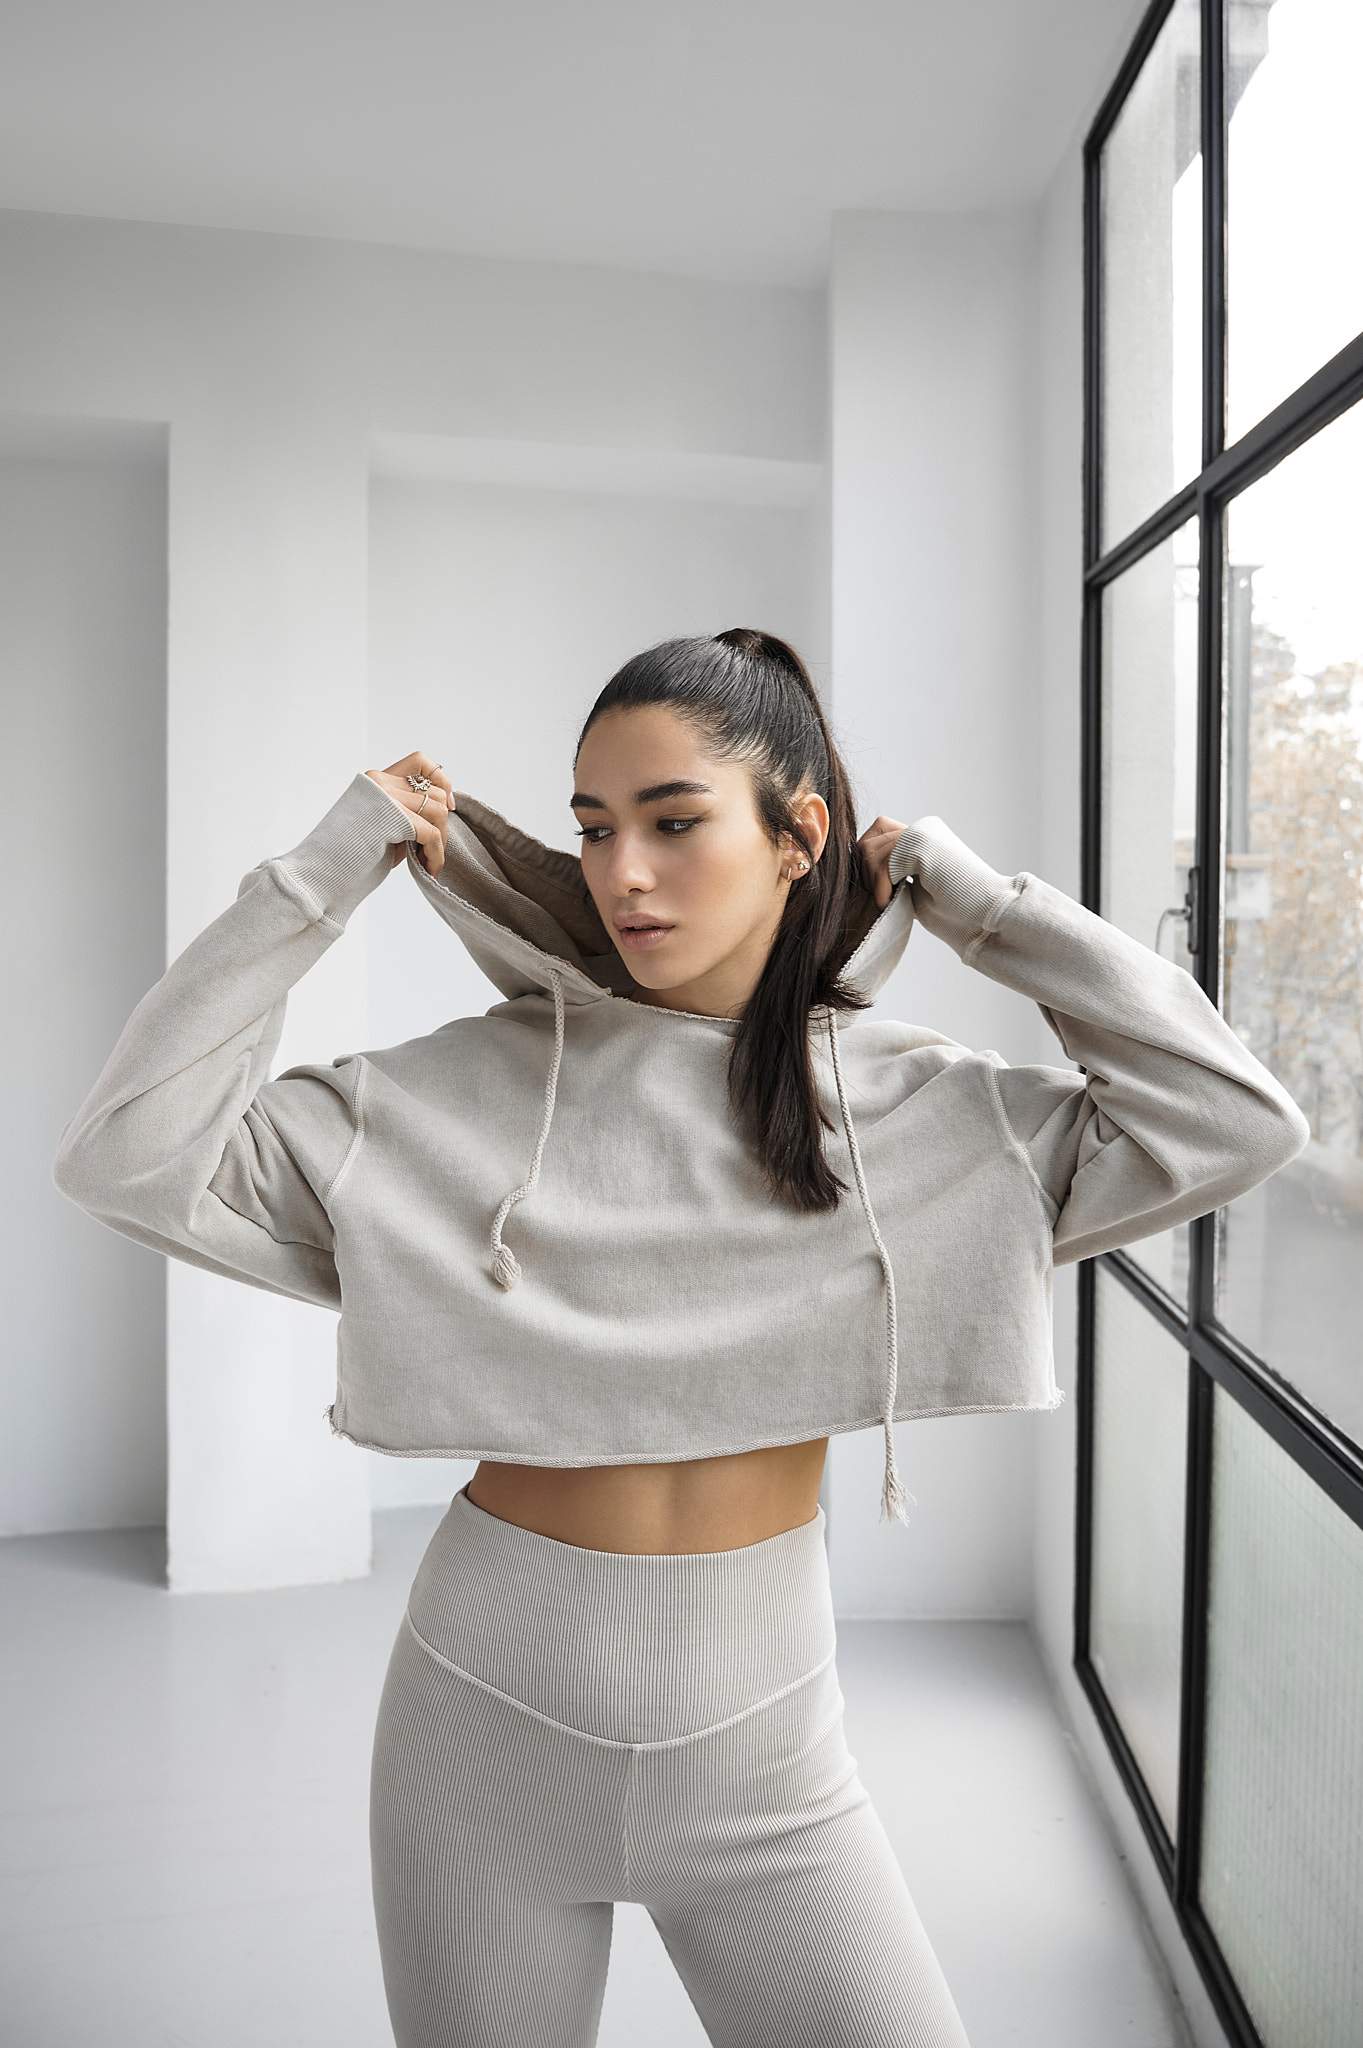 Made in Barcelona · 100 % Premium Organic Cotton · Made to Last · Environmental Friendly Dye · Extremely soft fabric · Brushed finish on the inside for a warm, smooth feeling · Easy-to-Wear and Match · Loose/Oversized fit · Raw cut on waist · Low shoulder · Oversized sleeves · Thumbholes · Worn-out feel · Light Beige - Front Image 